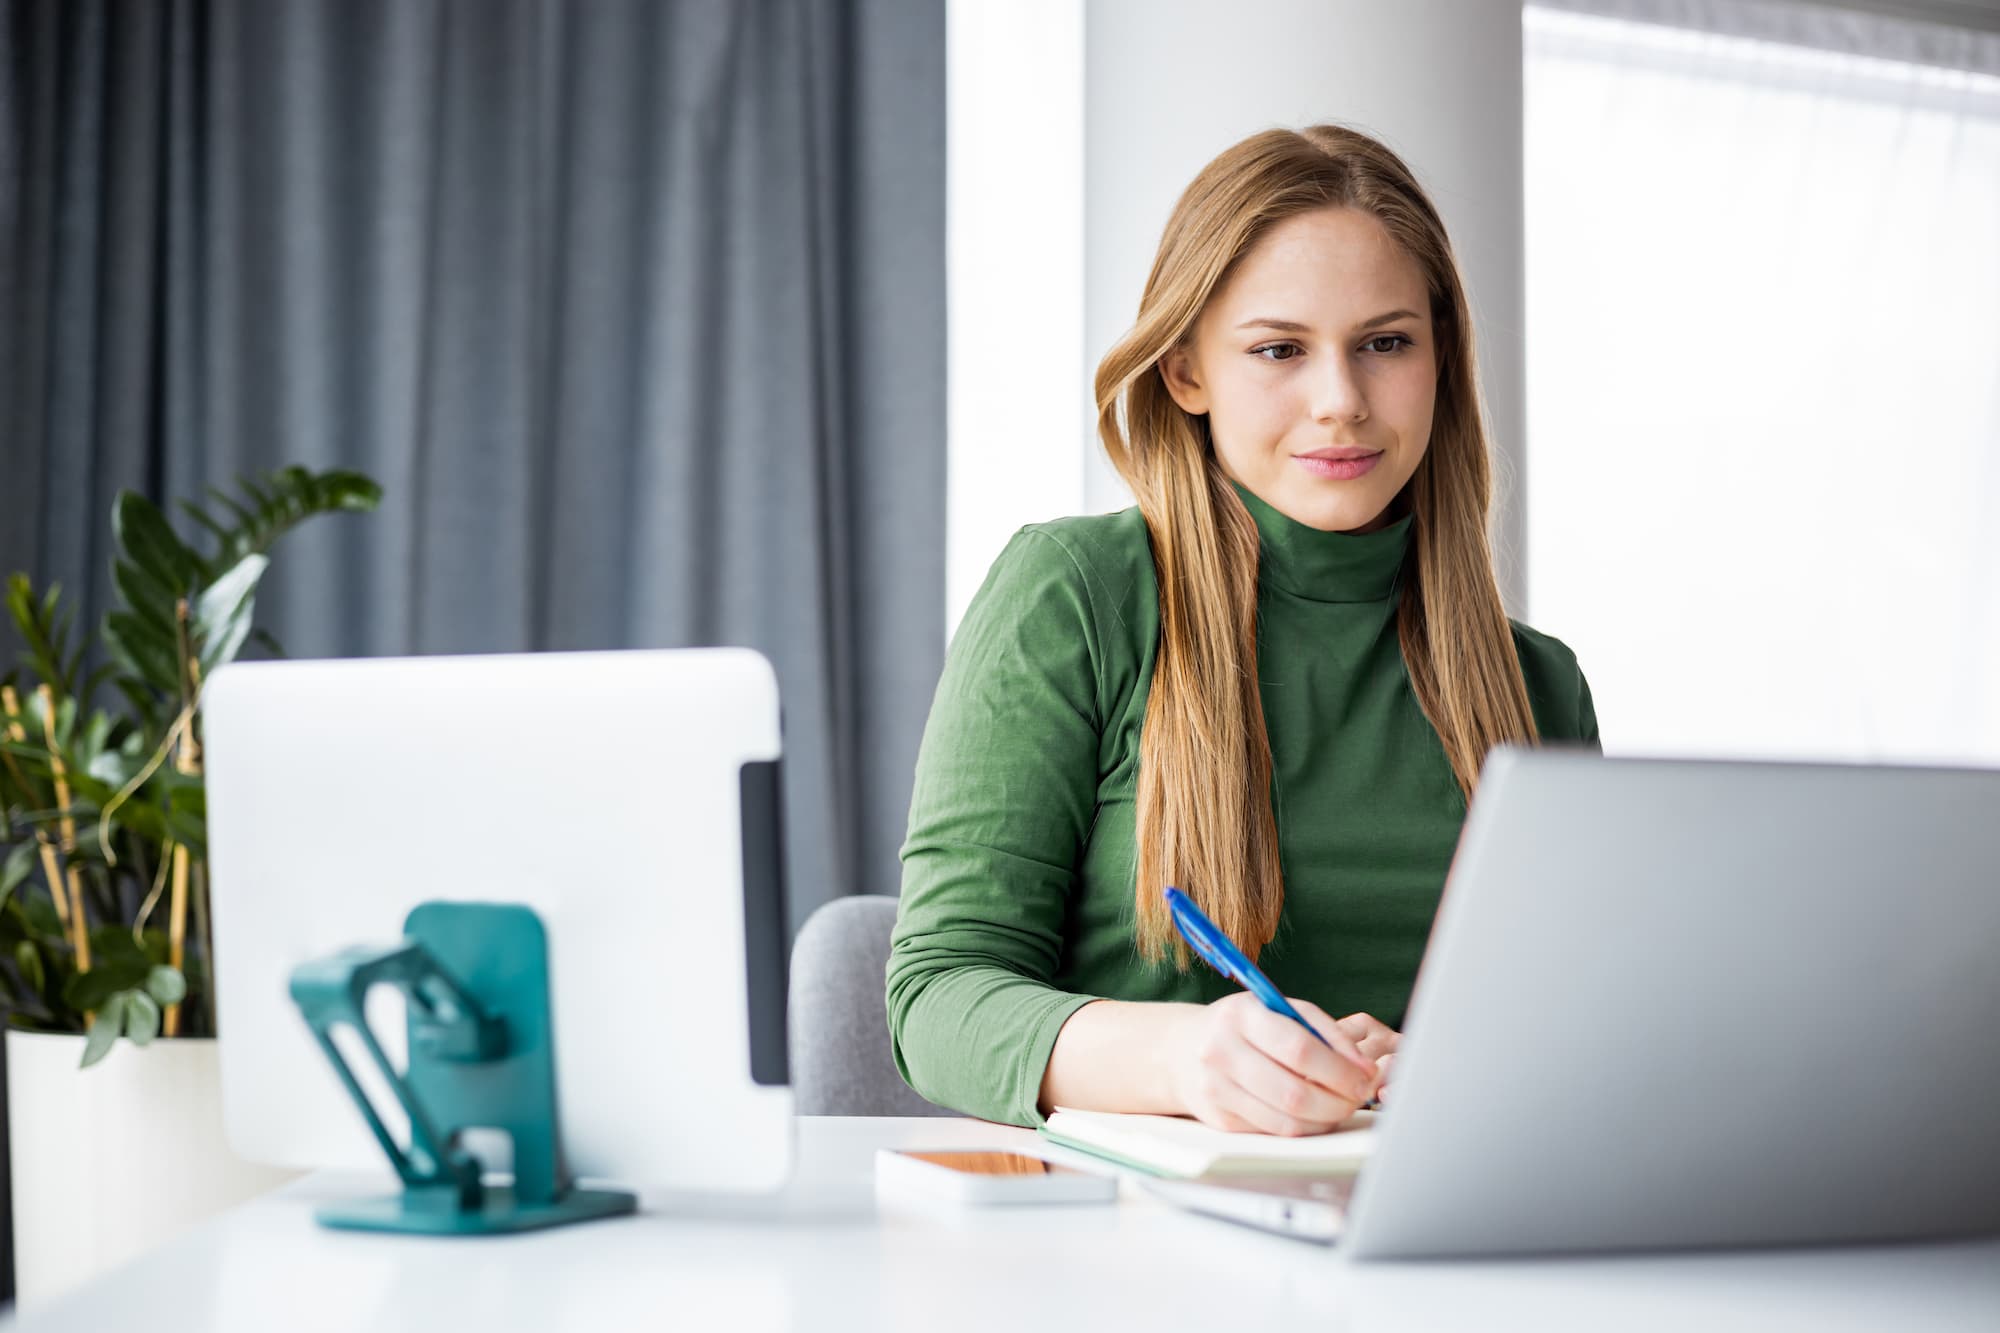 Woman working at desk looking at laptop